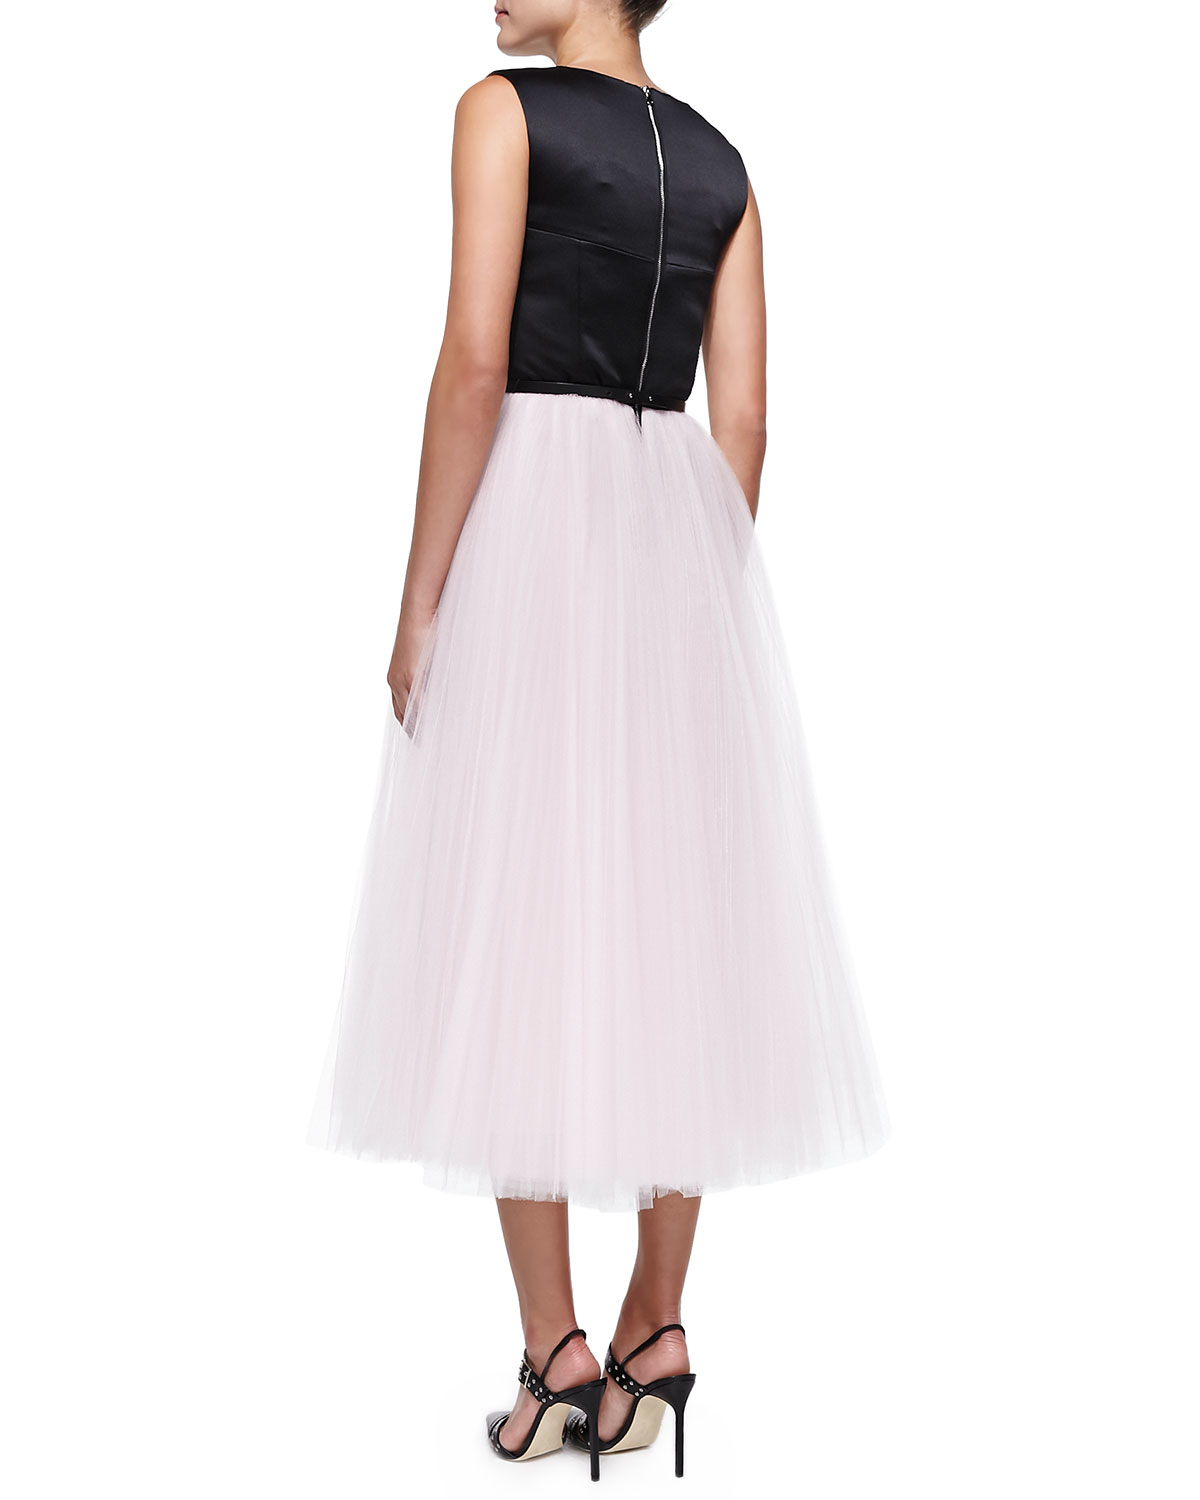 Lyst - Milly Sleeveless Bustier Cocktail Dress W/ Tulle Skirt in Black